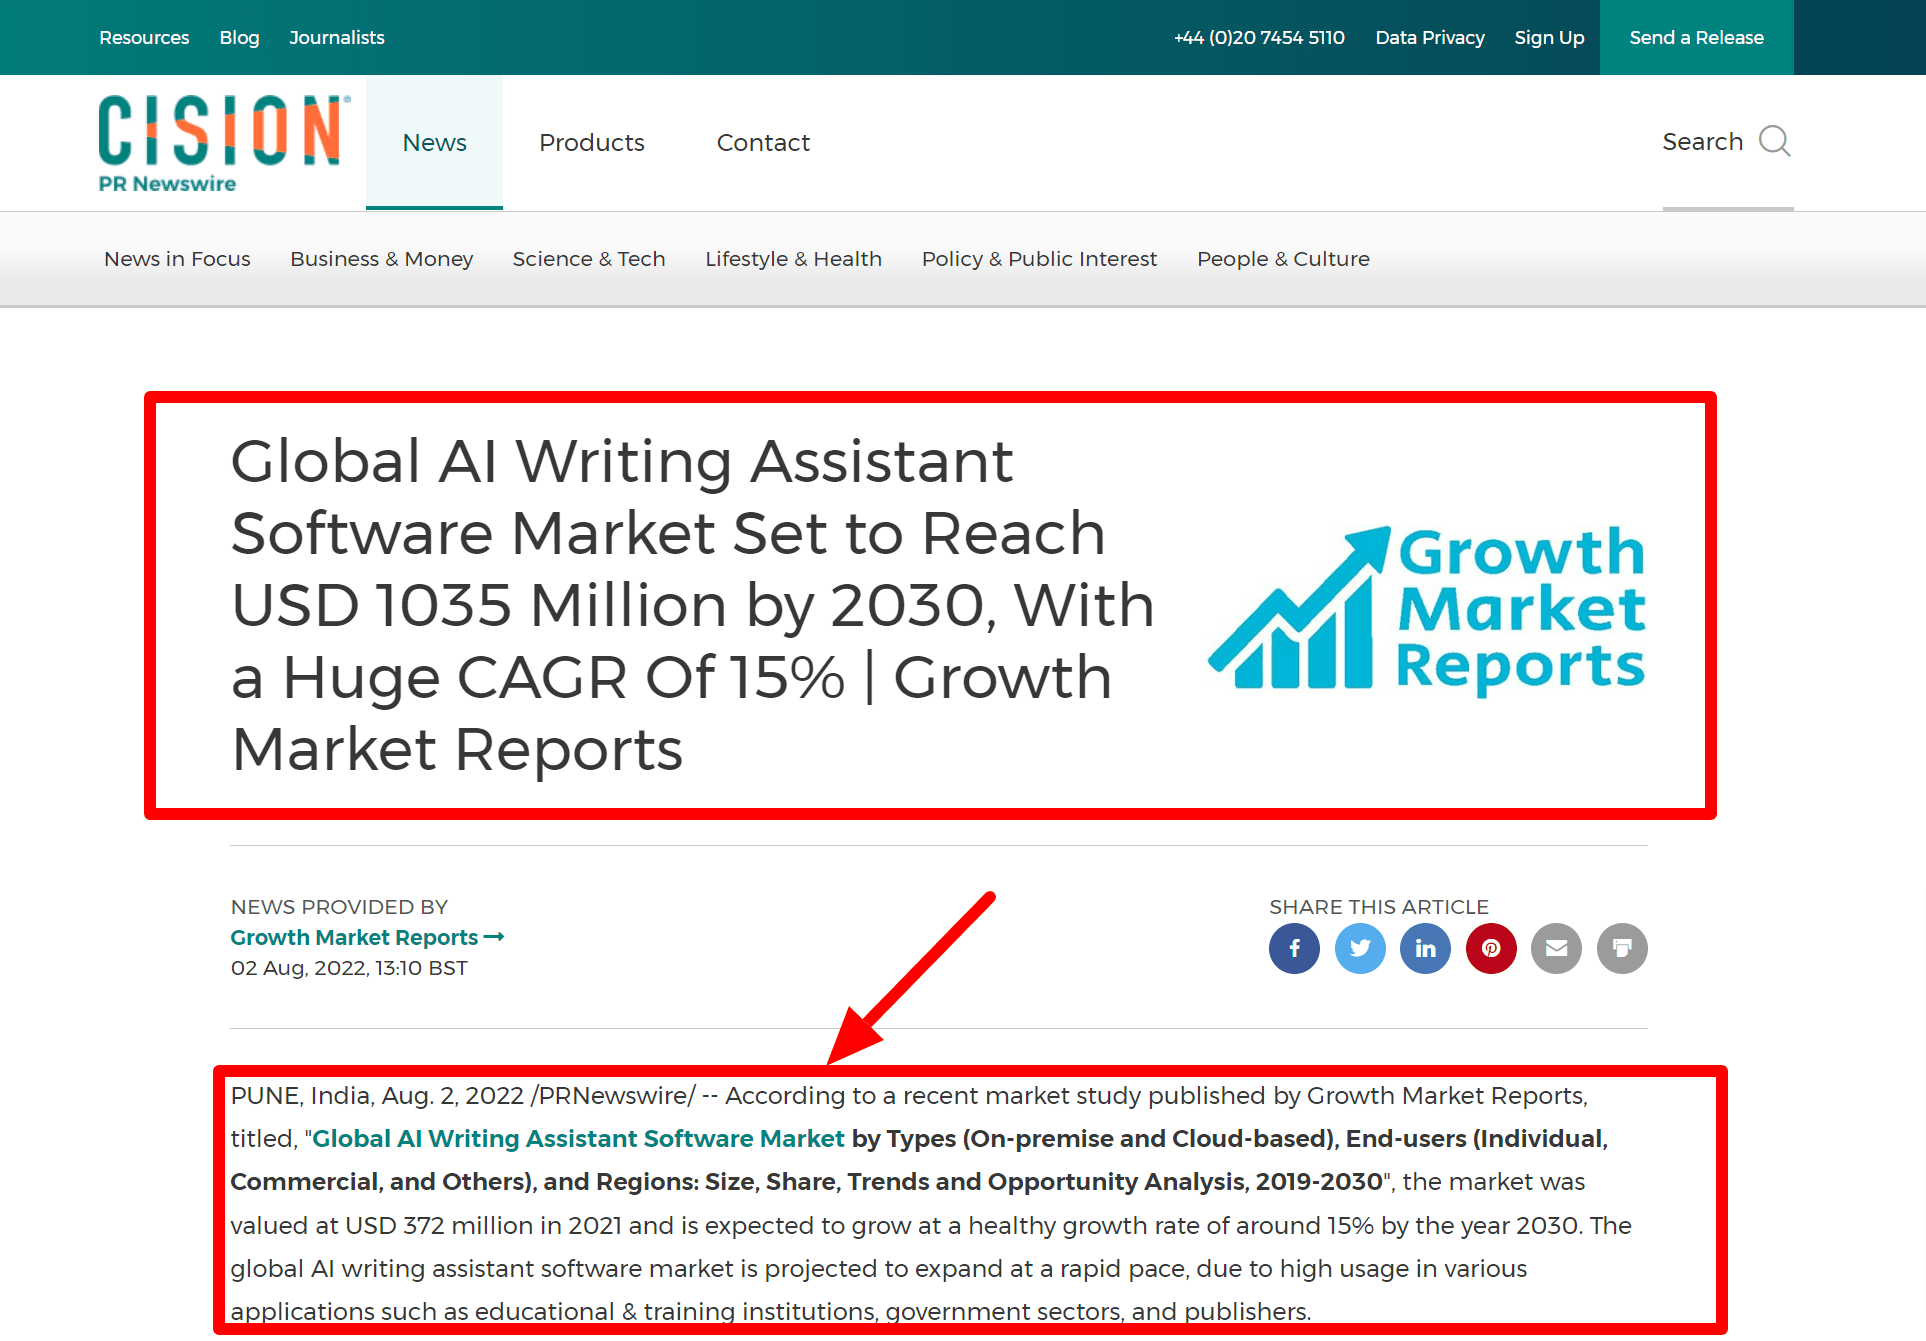 Global AI Writing Assistant Software Market Set to Reach USD 1035 Million by 2030, With a Huge CAGR